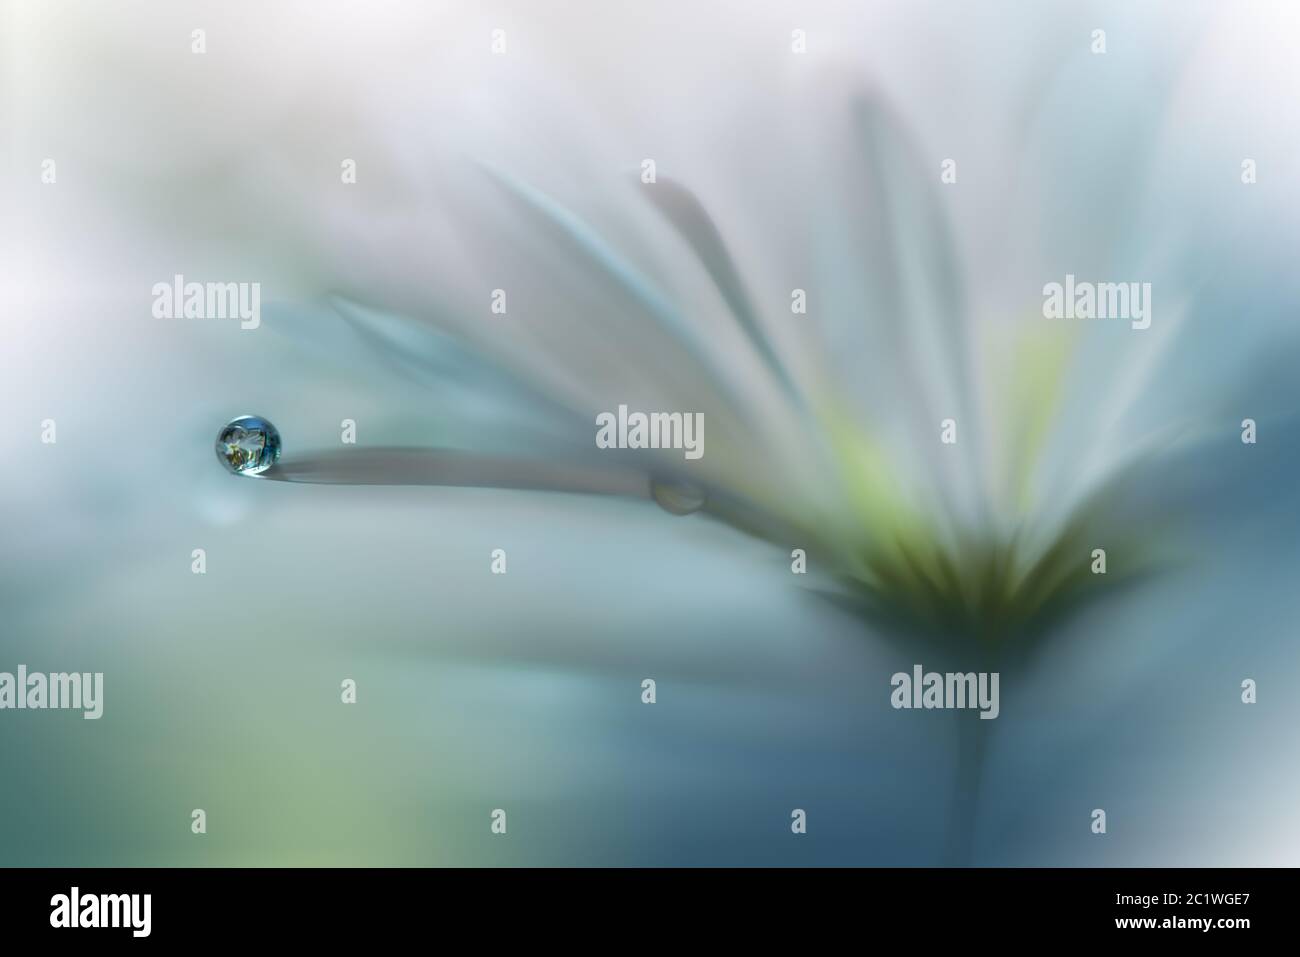 Beautiful Nature Background.Colorful Artistic Wallpaper.Natural Macro Photography.Beauty in Nature.Creative Floral Art.Tranquil nature closeup view.Blurred space for your text.Abstract Spring Flowers.Water drop,droplet. Stock Photo